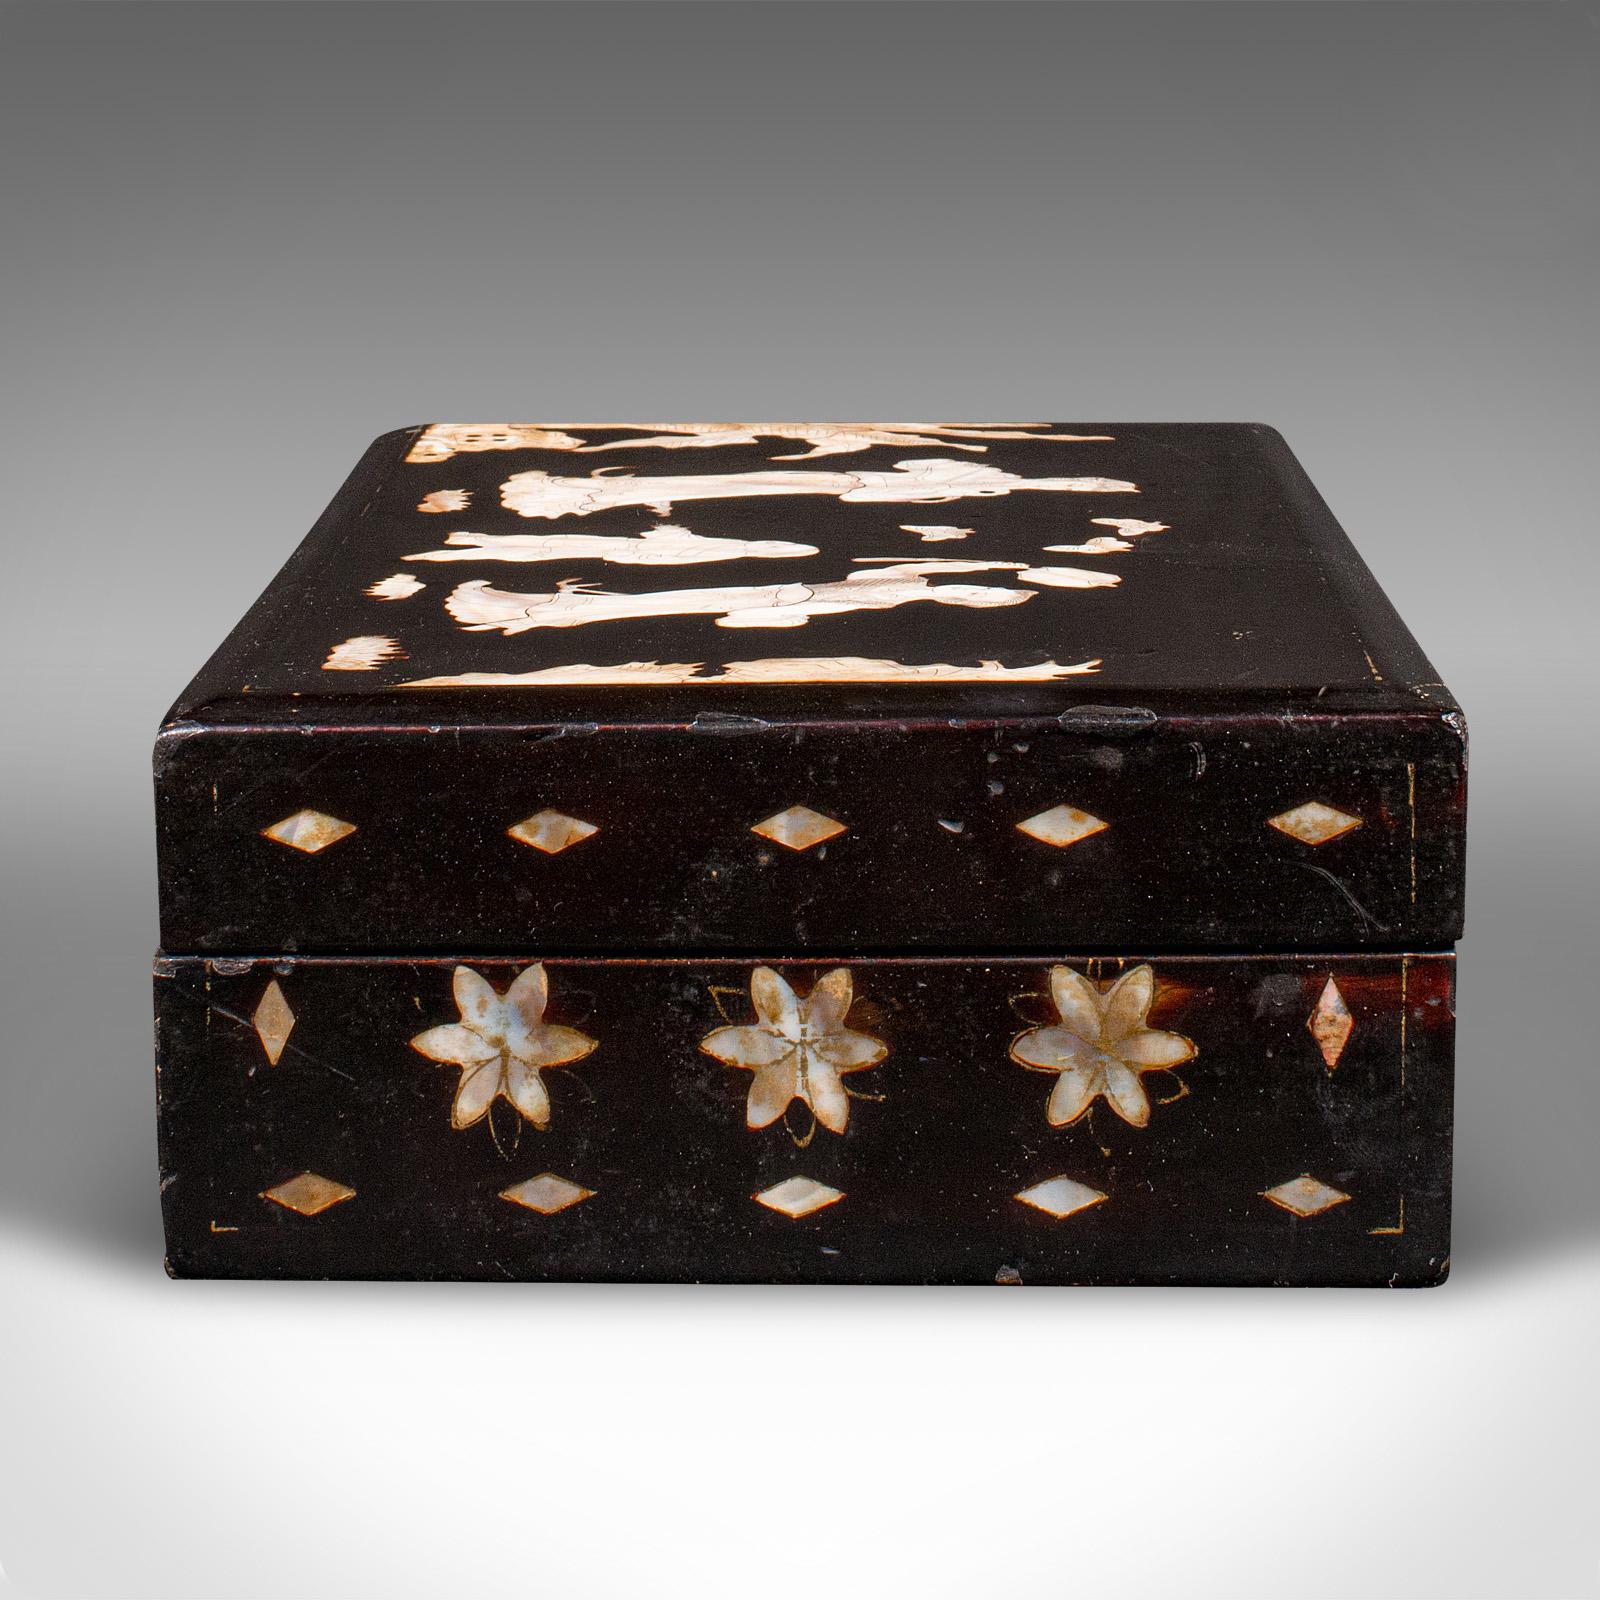 19th Century Antique Decorative Vanity Case, Japanese, Lacquer, Lidded Box, Victorian, C.1900 For Sale